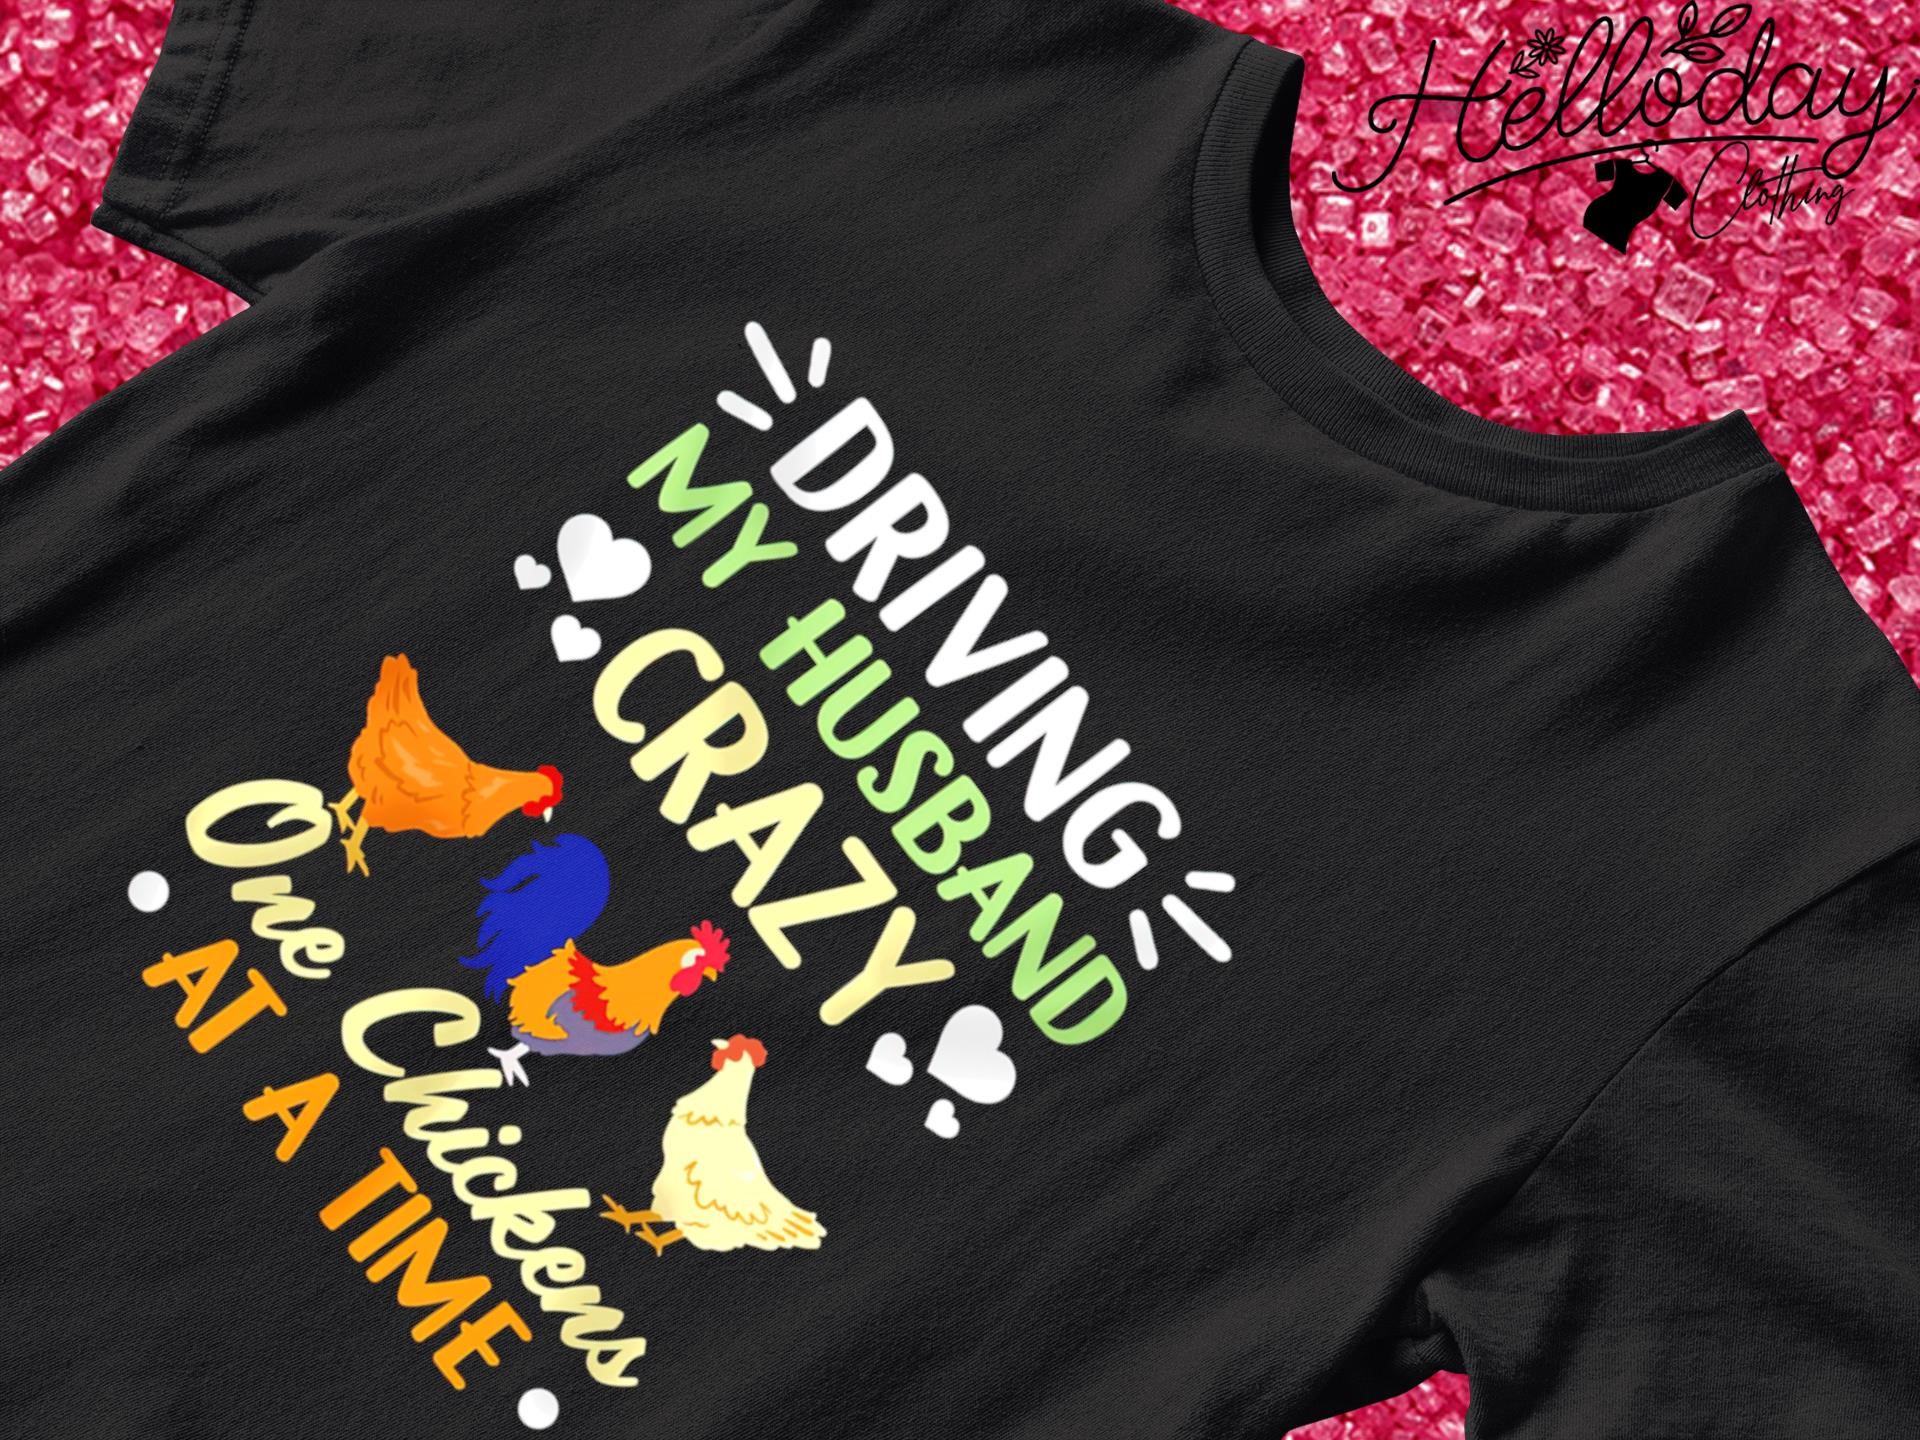 Driving my husband crazy one Chickens at a time T-shirt